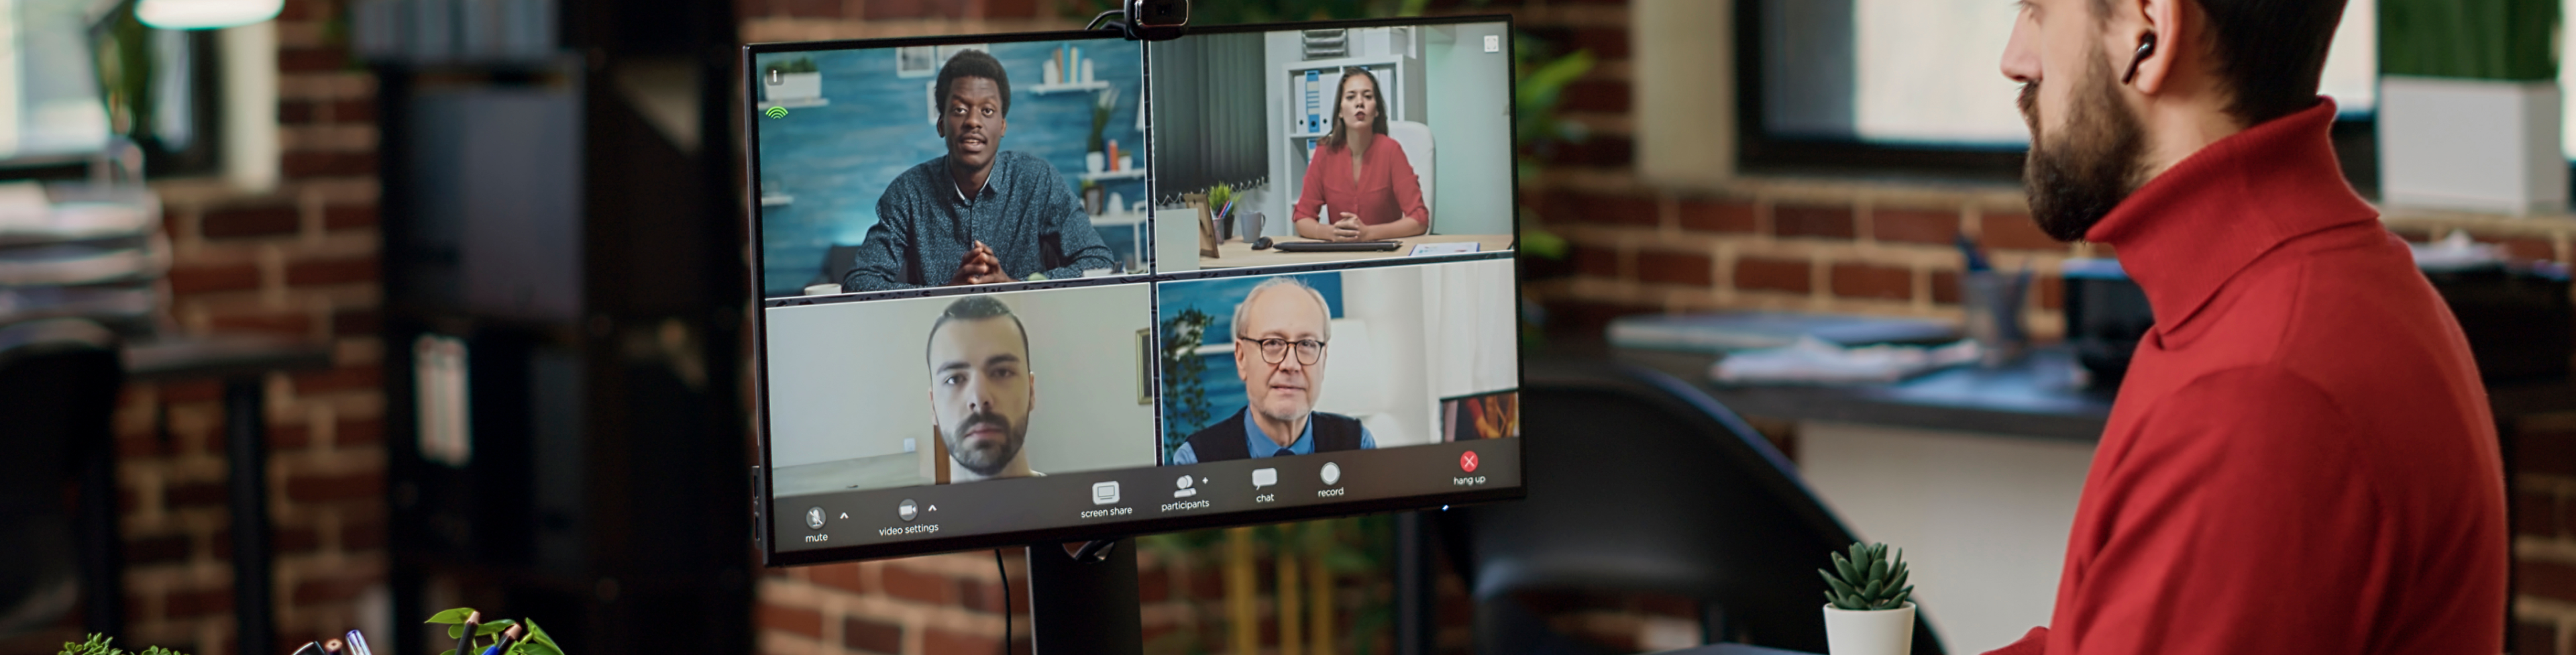 Hire Remote Team & Employees for Boost Productivity - Intelvue